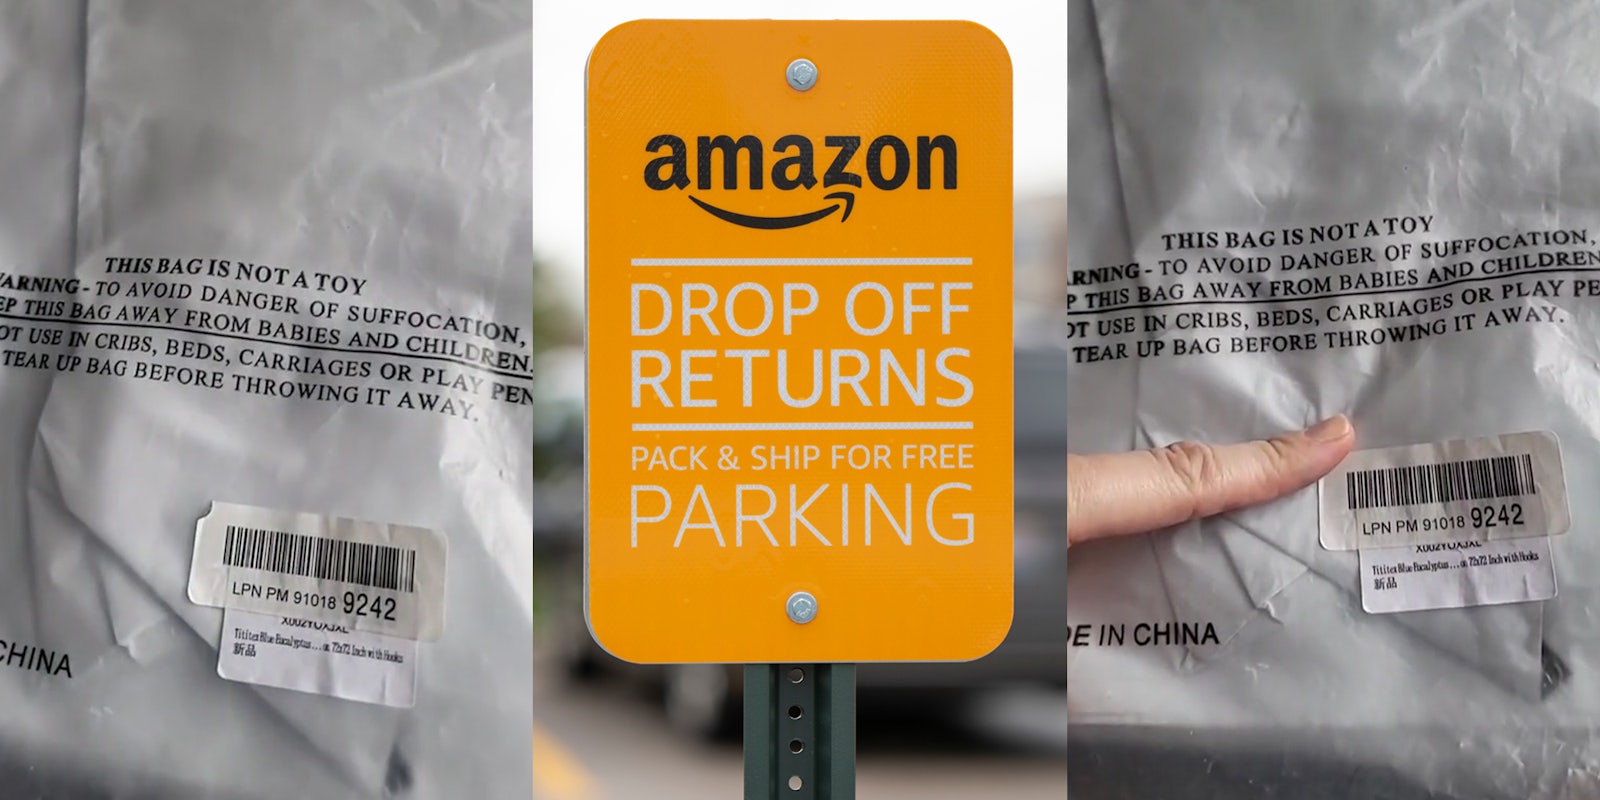 Amazon package with sticker on right corner (l) Amazon DROP OFF RETURNS' sign in parking lot (c) finger pointing to sticker on right side of Amazon package (r)